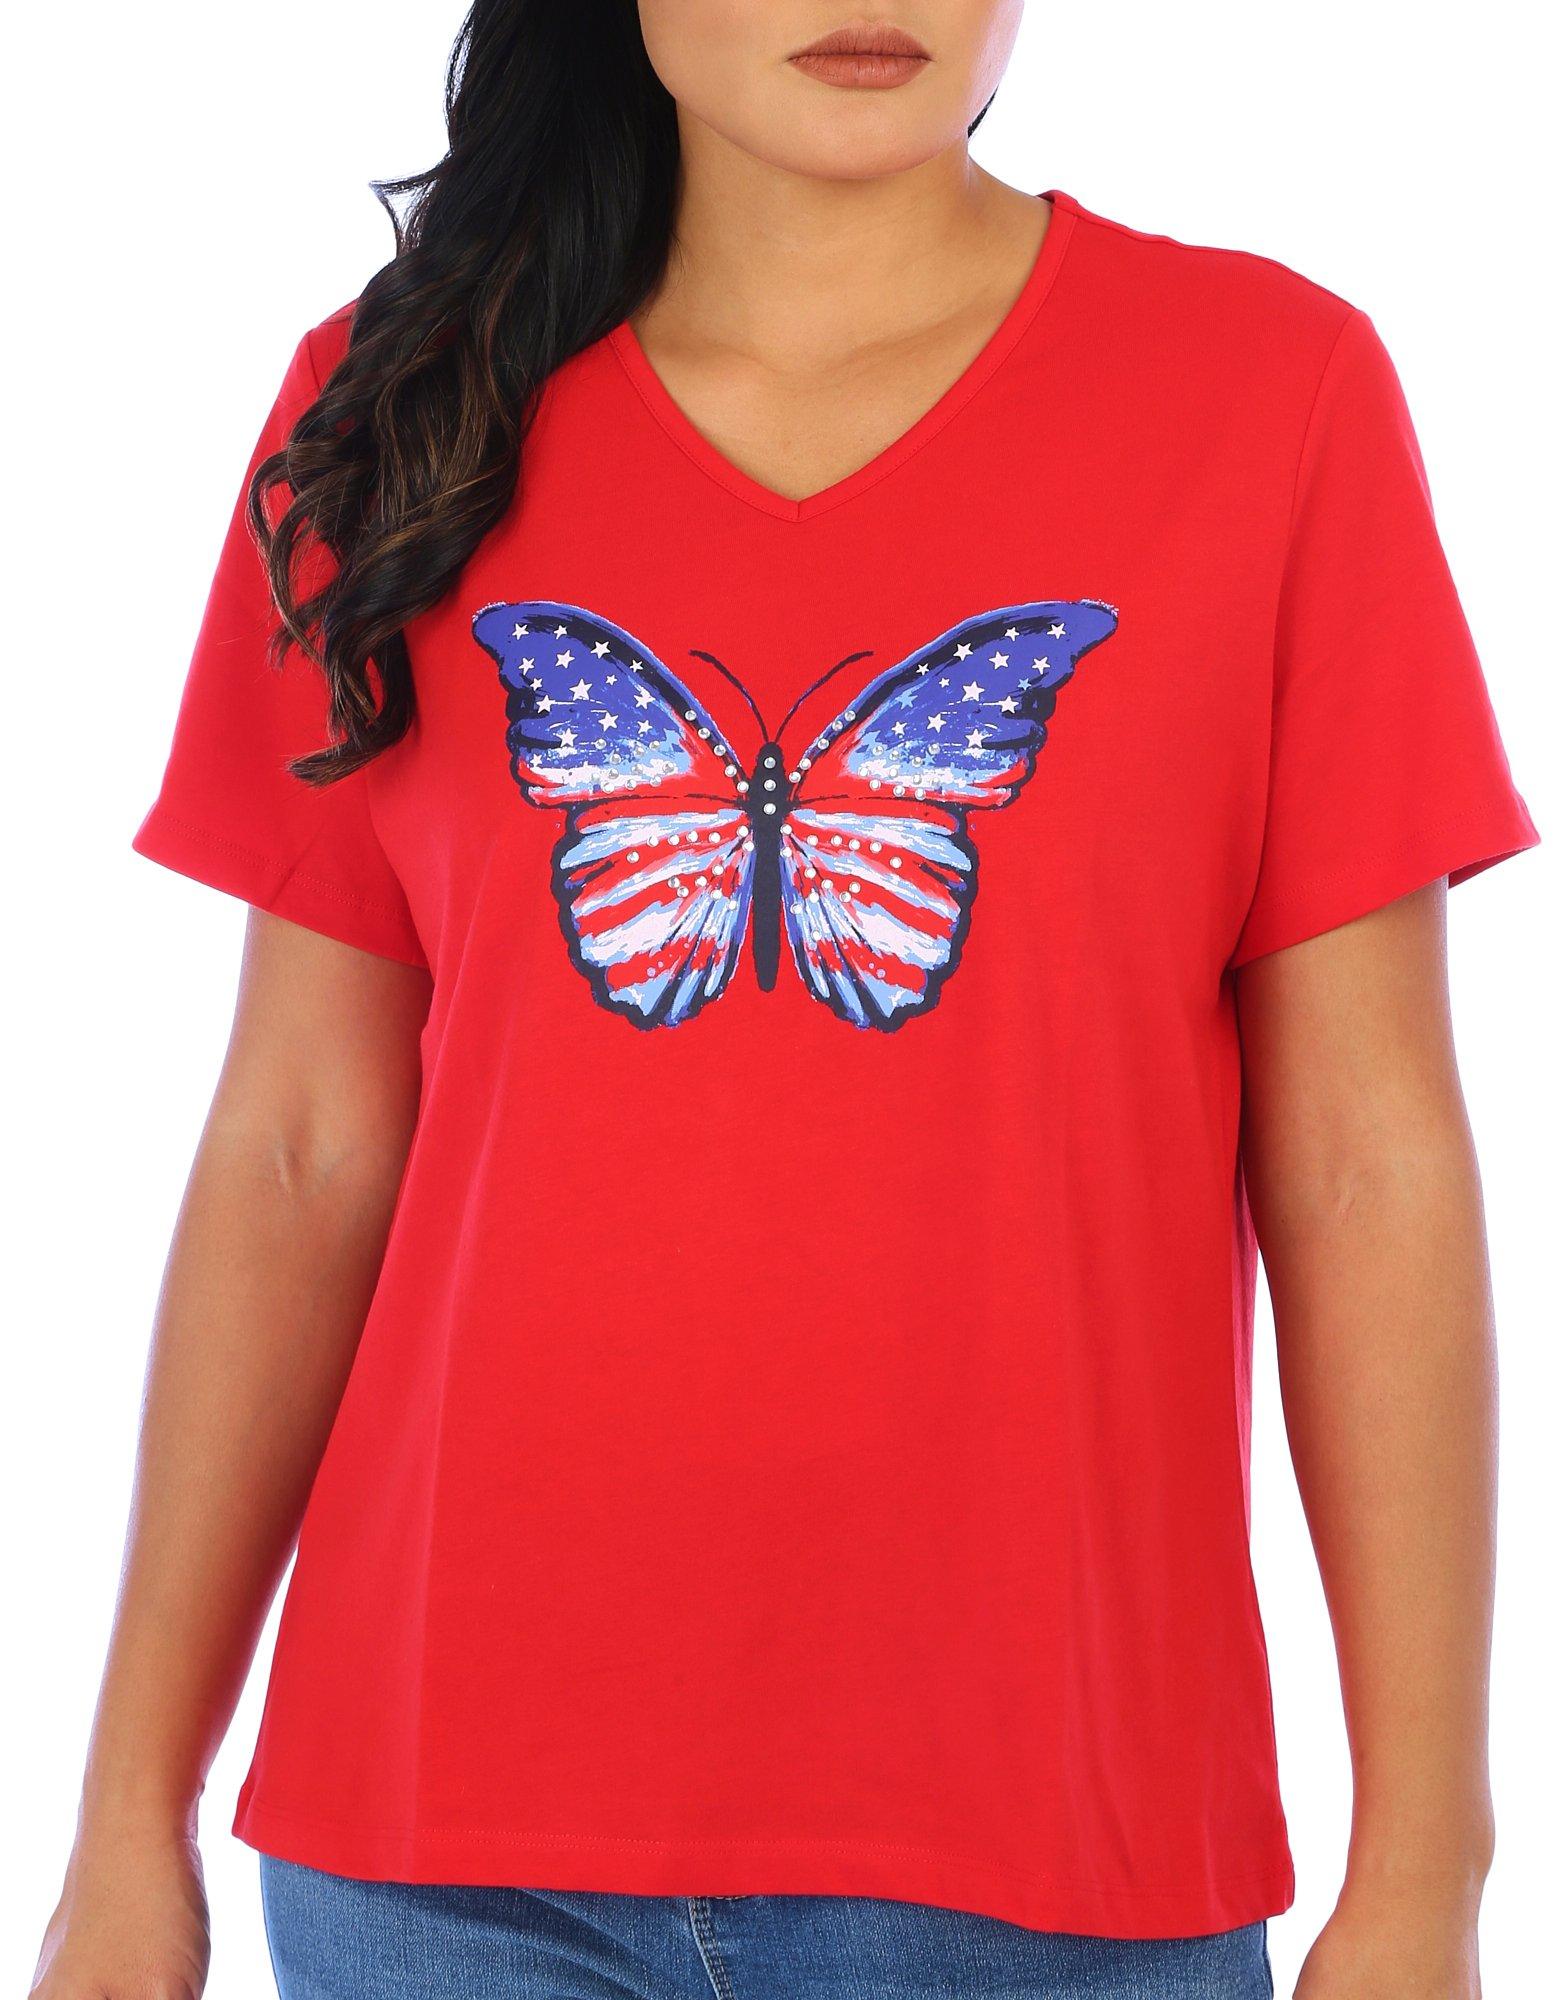 Coral Bay Womens Americana Jewel Butterfly Short Sleeve Top